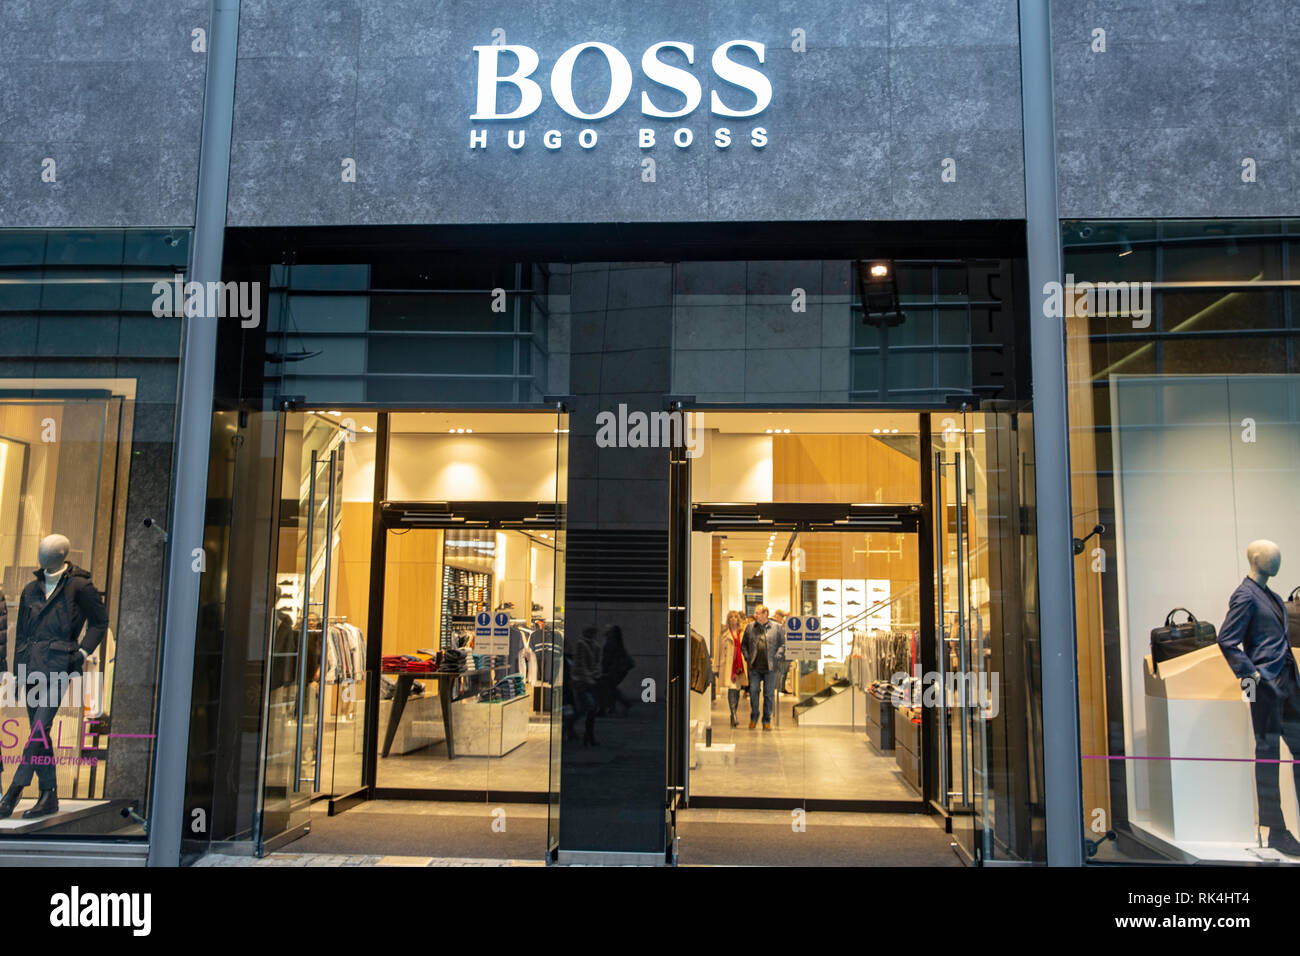 Hugo Boss clothing store shop in New Cathedral street, Manchester city  centre,England Stock Photo - Alamy